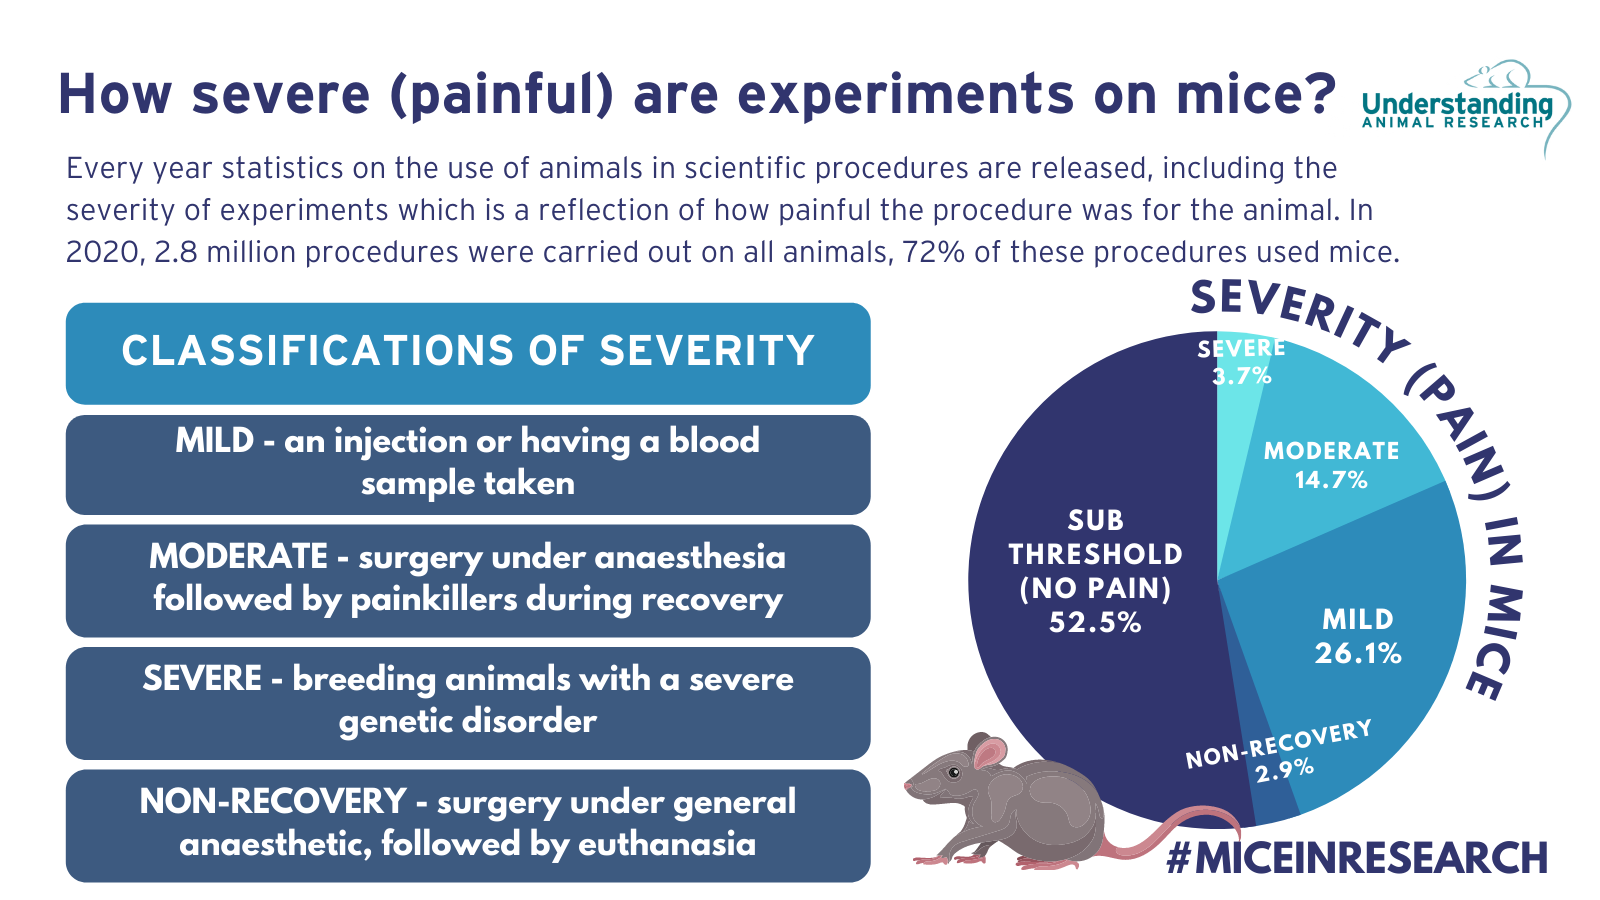 Statistics on the severity of procedures on mice in 2020 (Updated 2022)